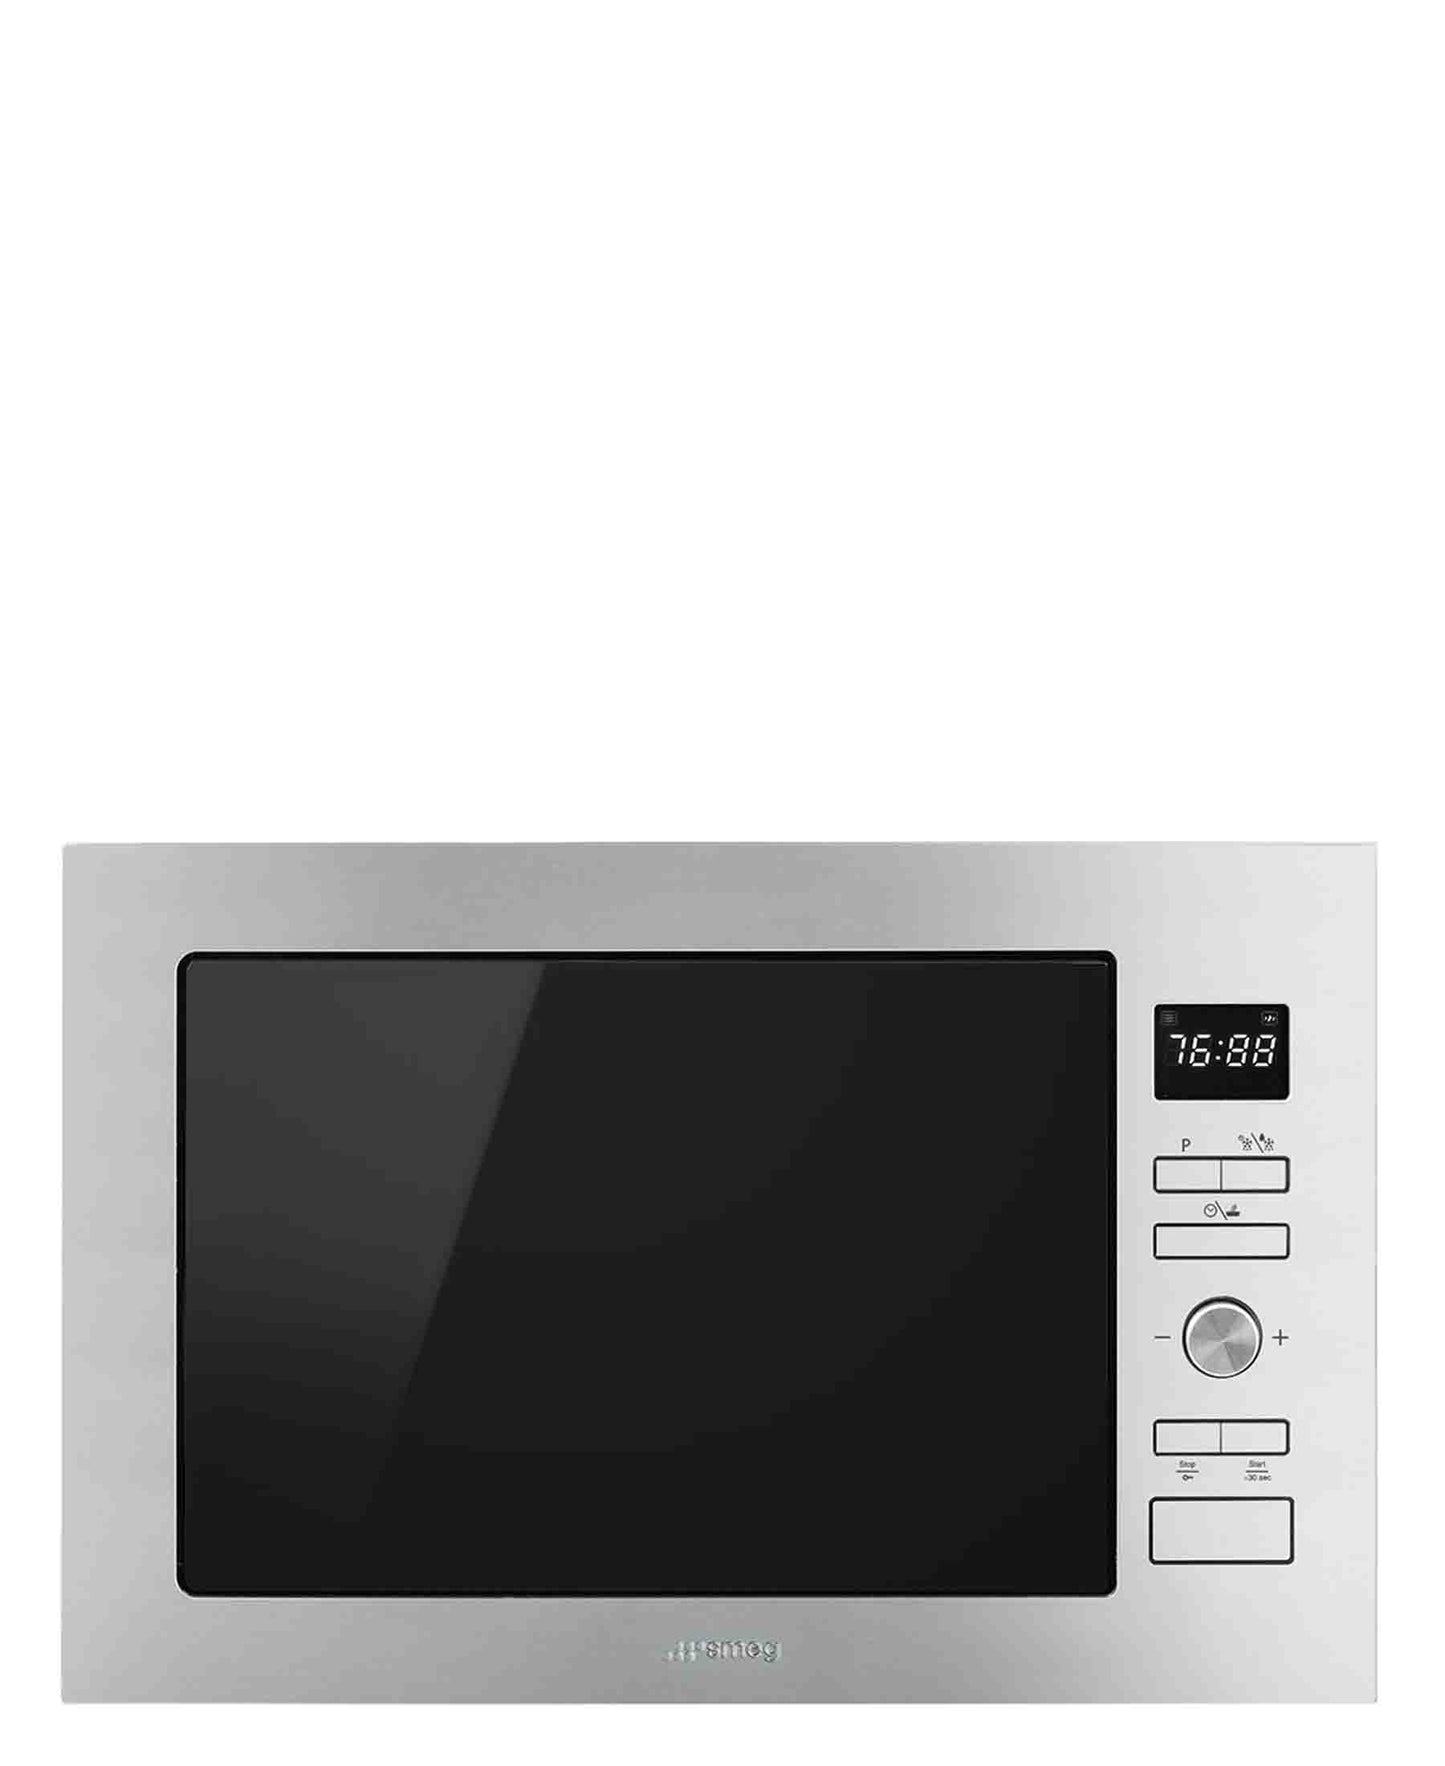 Smeg 60cm Built-In Classic Compact Microwave Oven - Silver